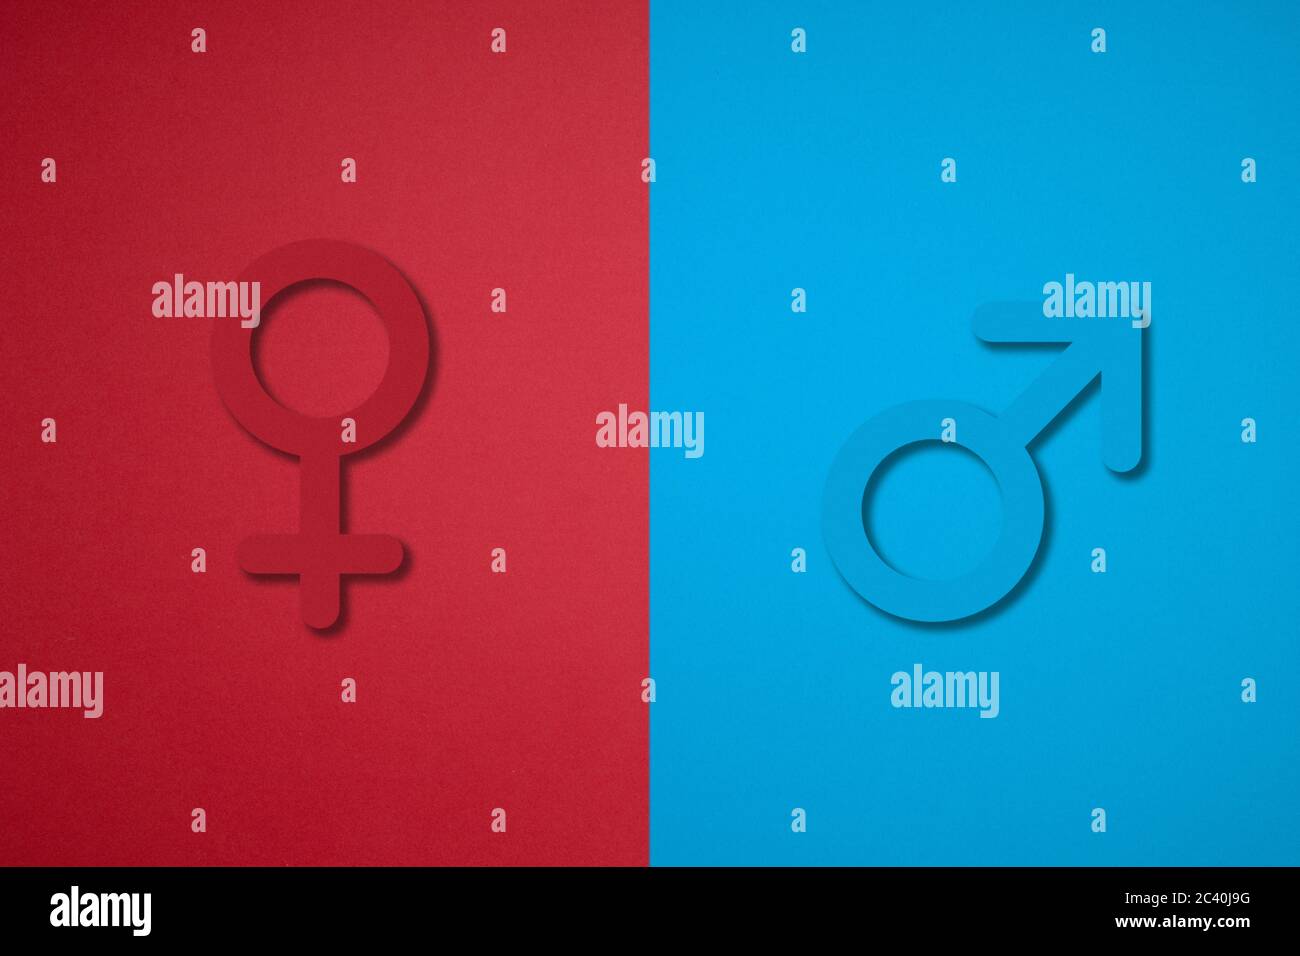 male and female gender symbols made by cutting paper. Stock Photo